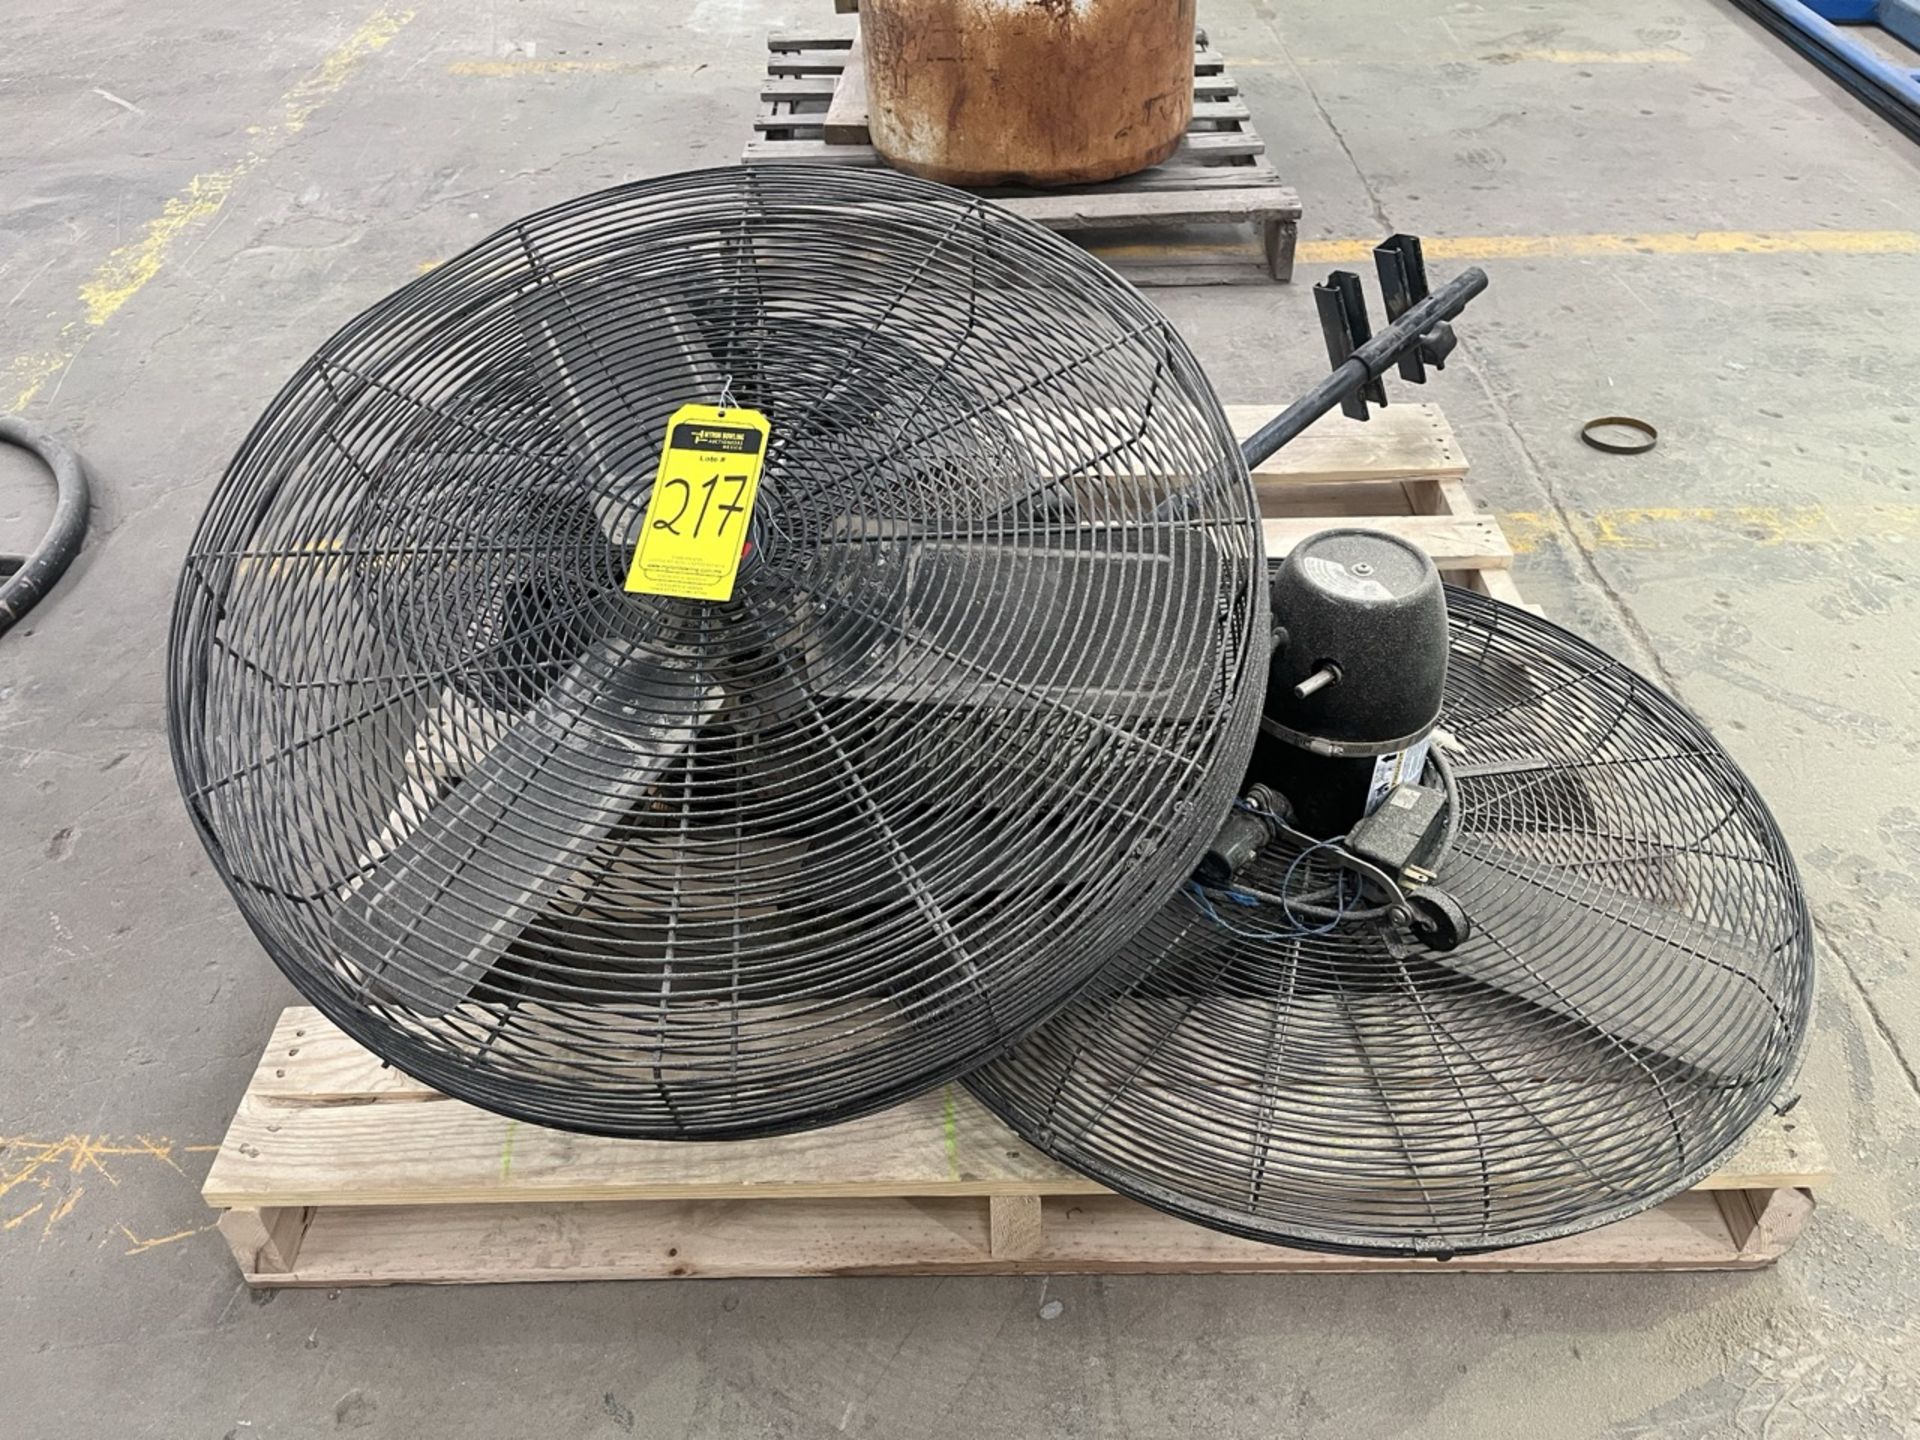 3 Dayton Fans (without base) of approximately 80 cm in diameter. / 3 Ventiladores empotrable (sin b